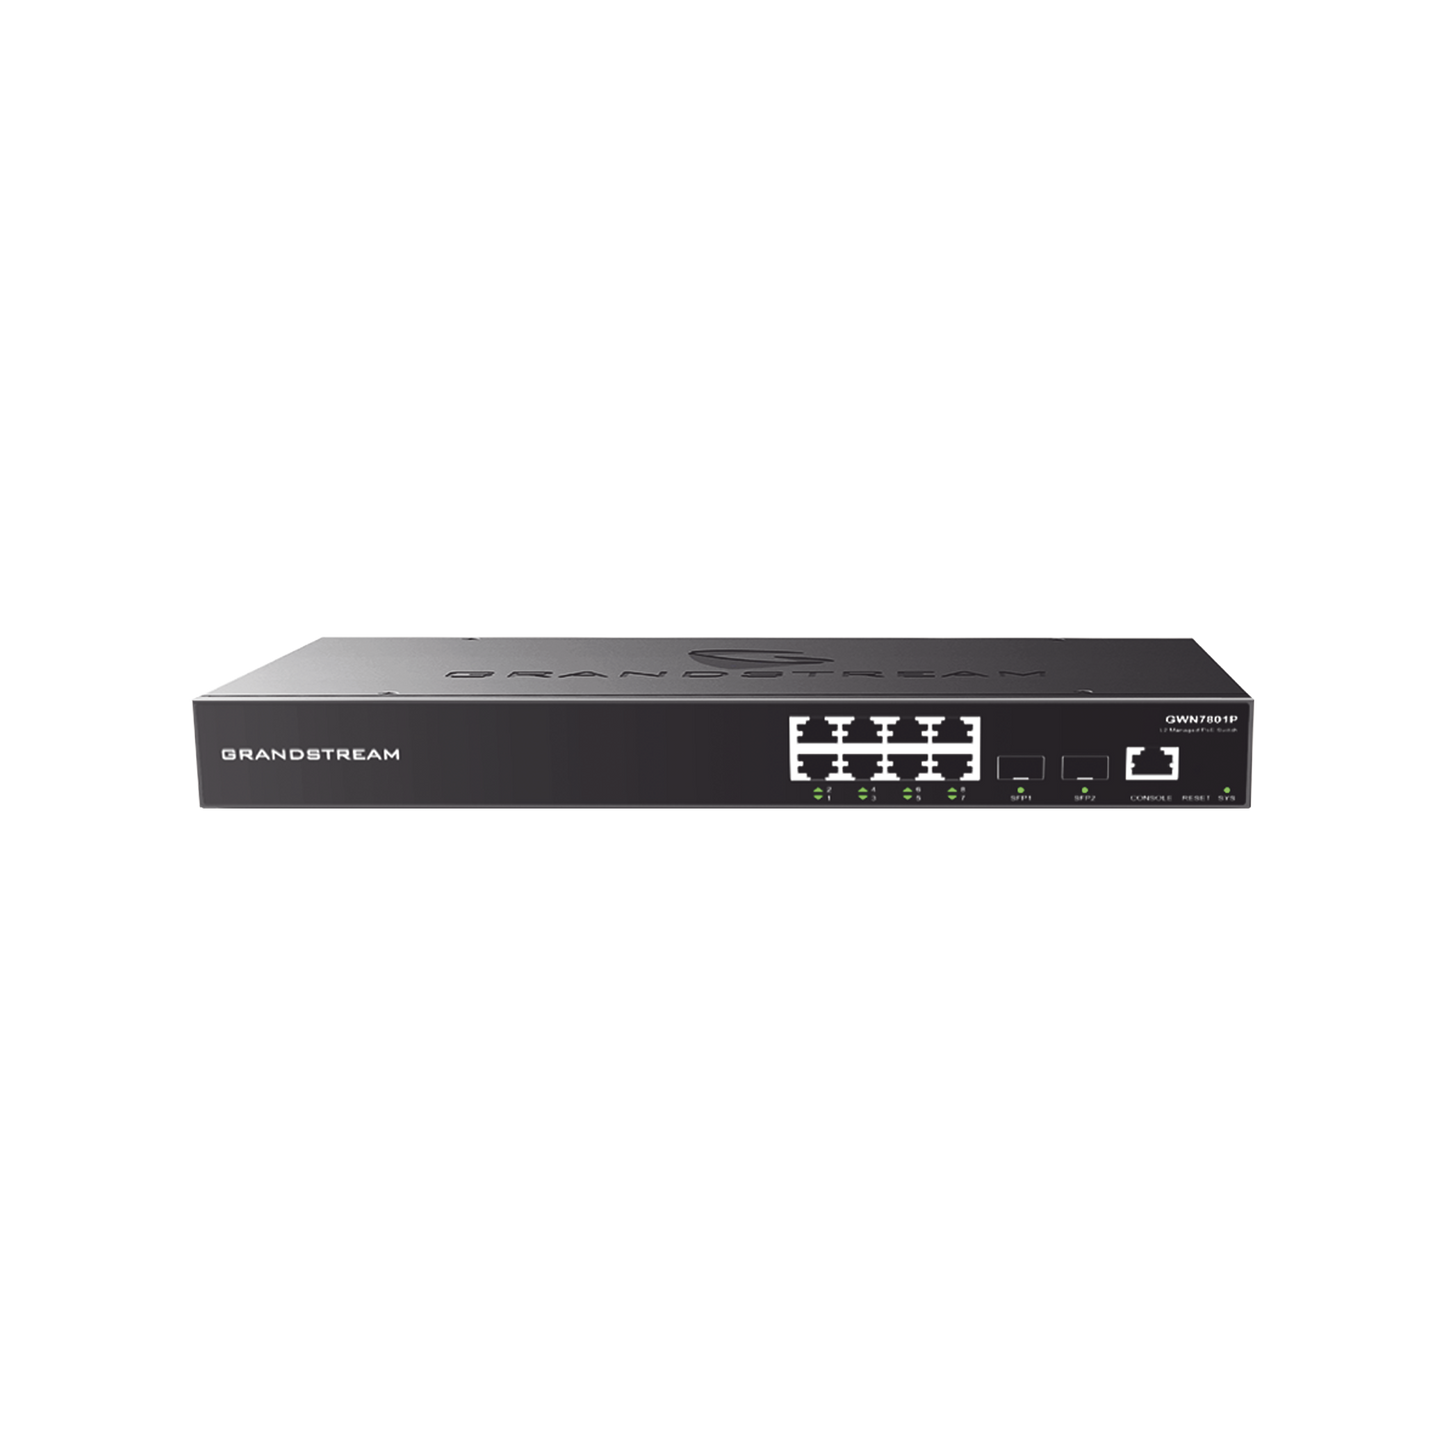 Managed Gigabit PoE+ Switch / 8 ports 10/100/1000 Mbps + 2 SFP Uplink Ports / Up to 120W / Compatible with GWN Cloud.